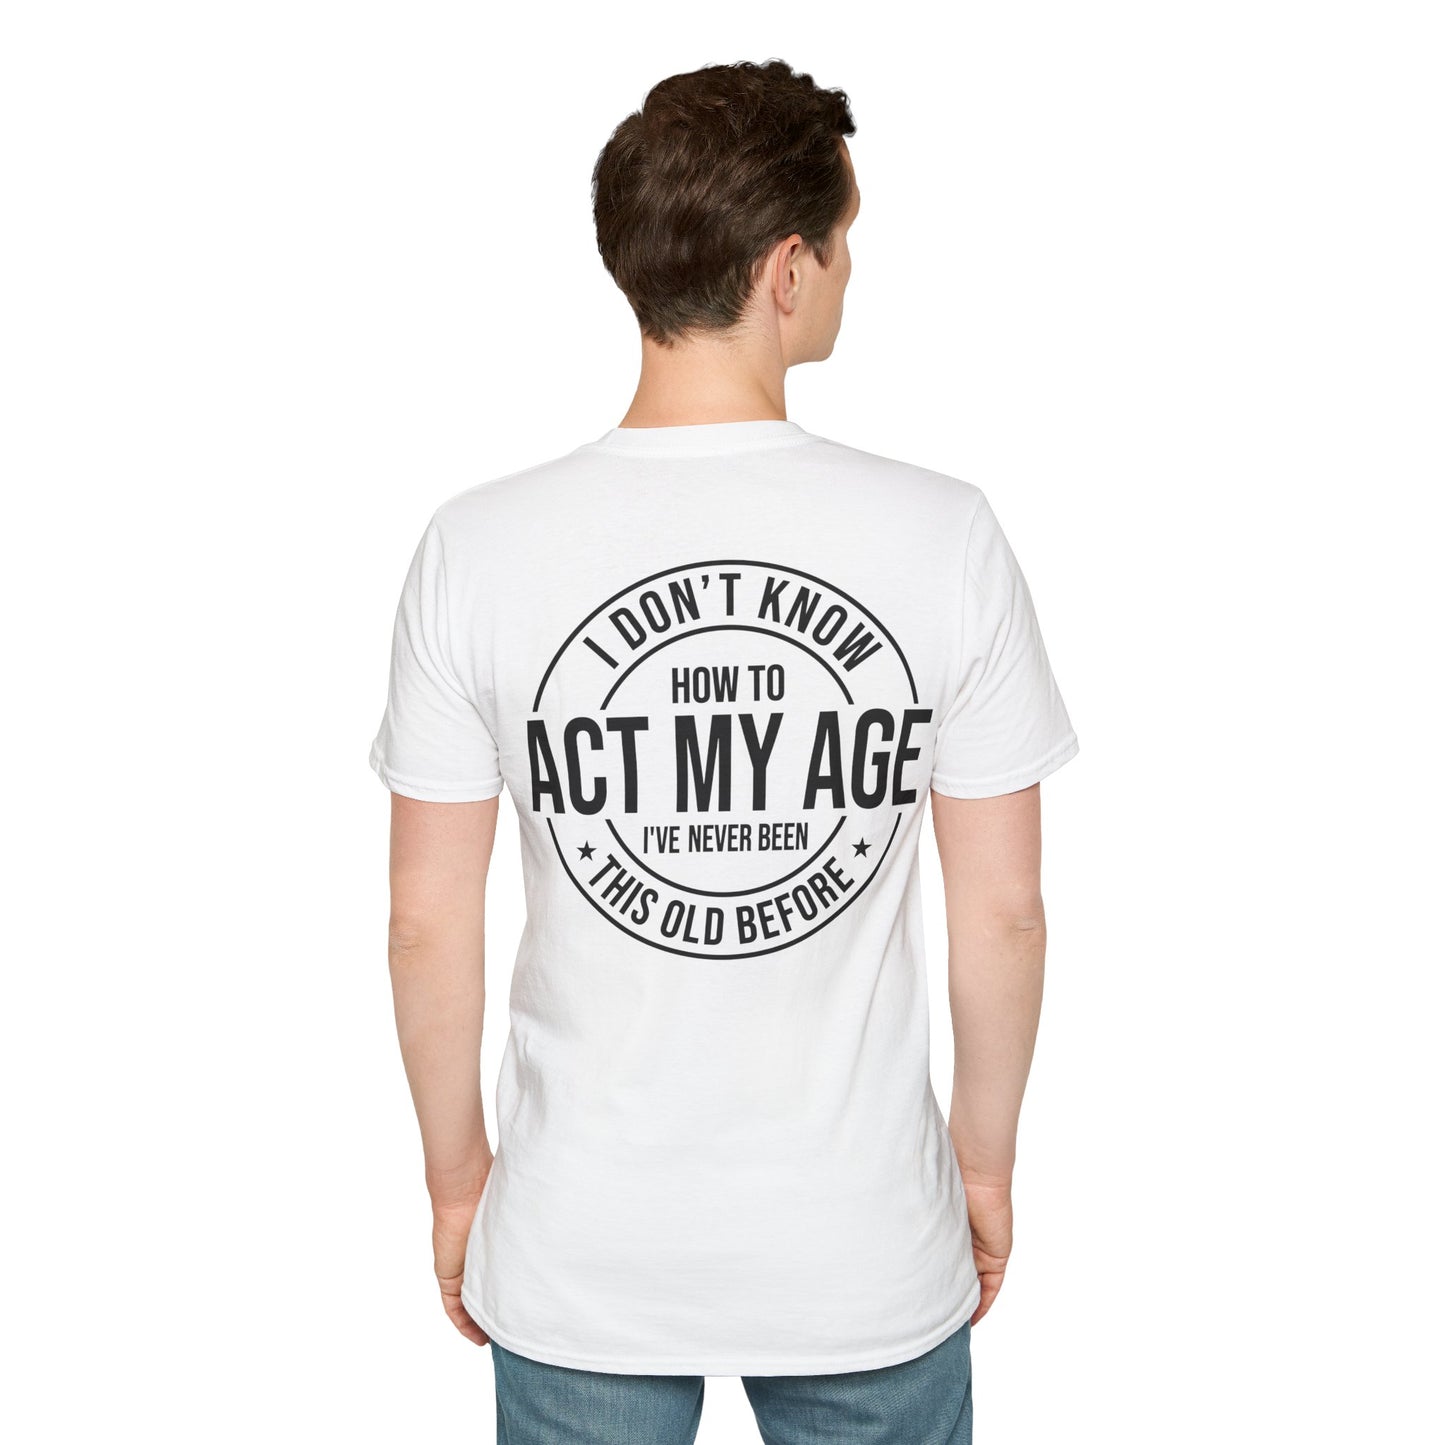 "I Dont Know How To Act My Age Ive Never Been This Old Before" Unisex Softstyle T-Shirt